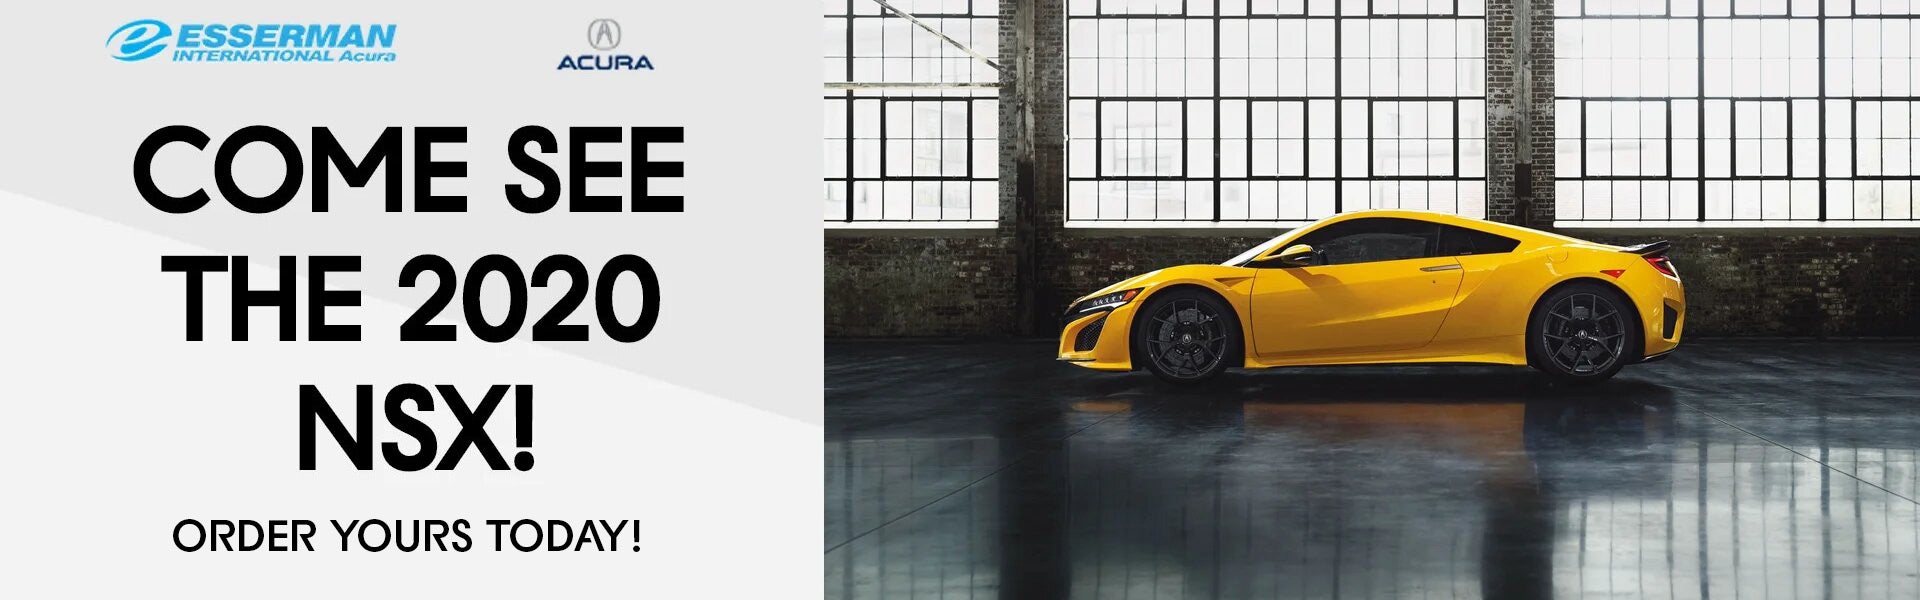 Come See the 2020 NSX!